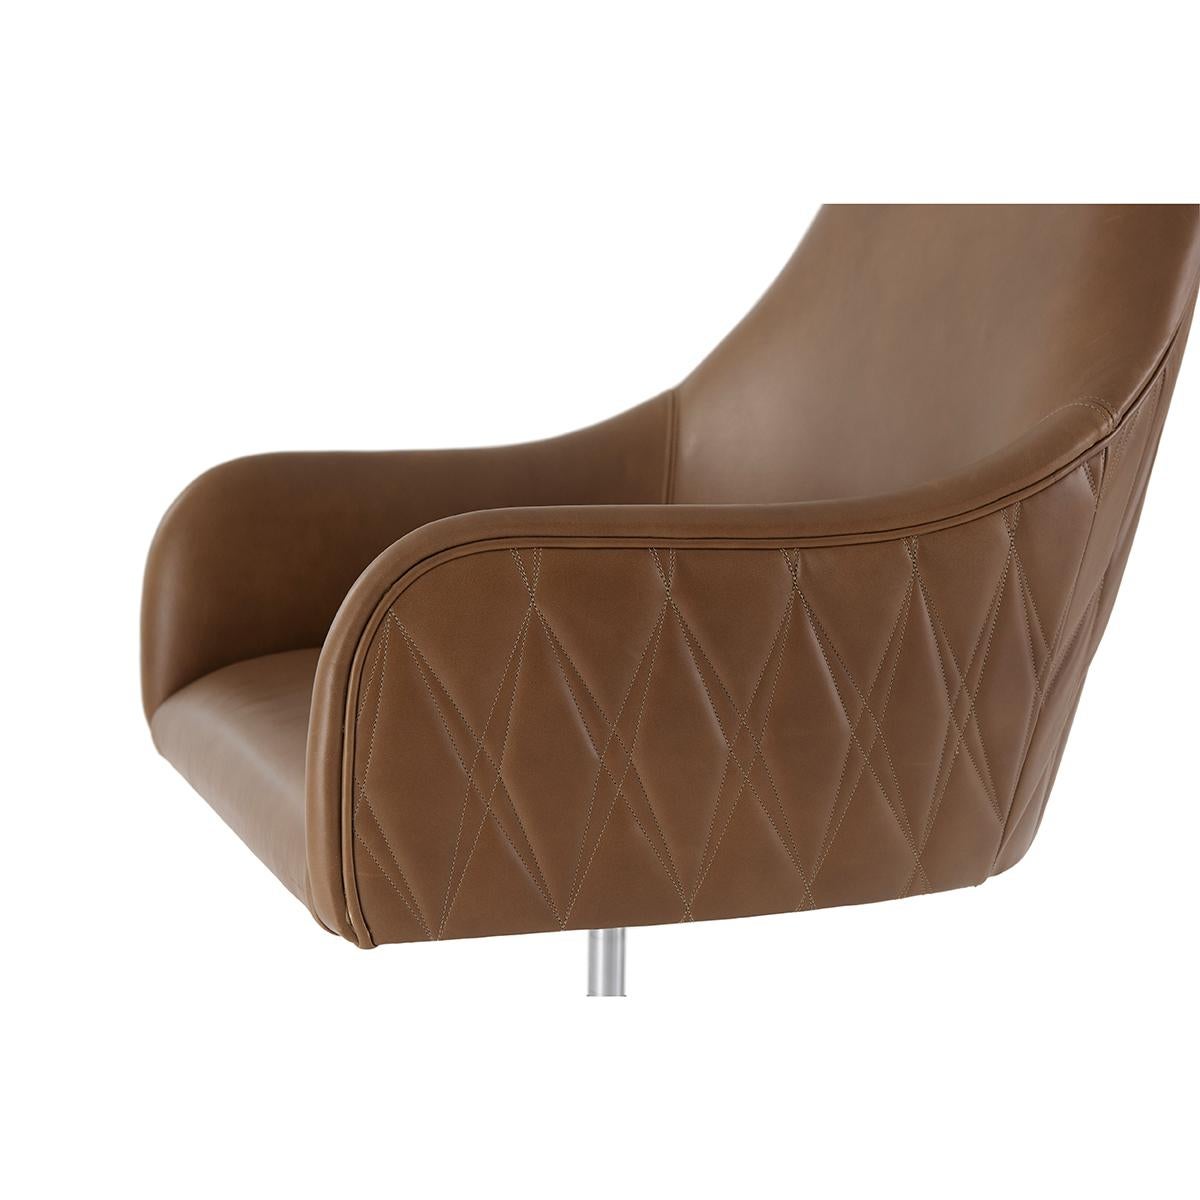 Vietnamese Modern Leather Quilted Desk Chair For Sale